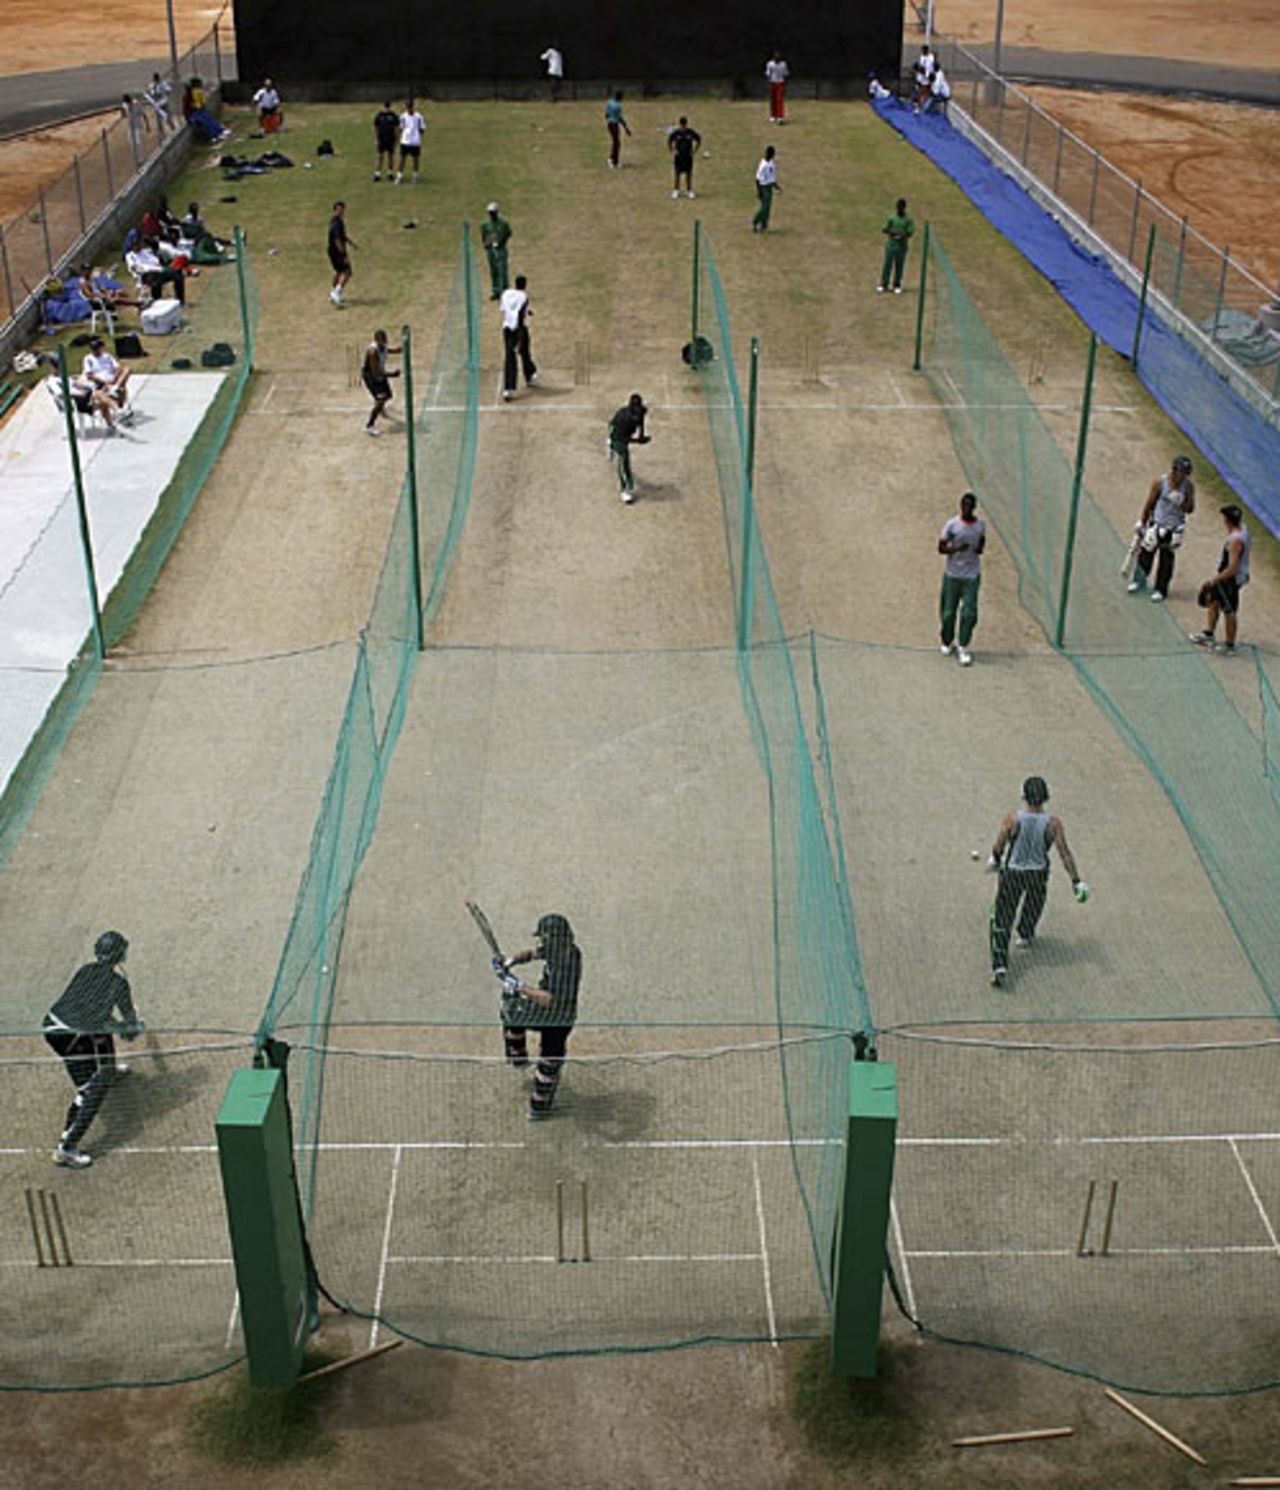 A bird's eye view of New Zealand's net session in Guyana, 2007 World Cup, Guyana, April 8, 2007